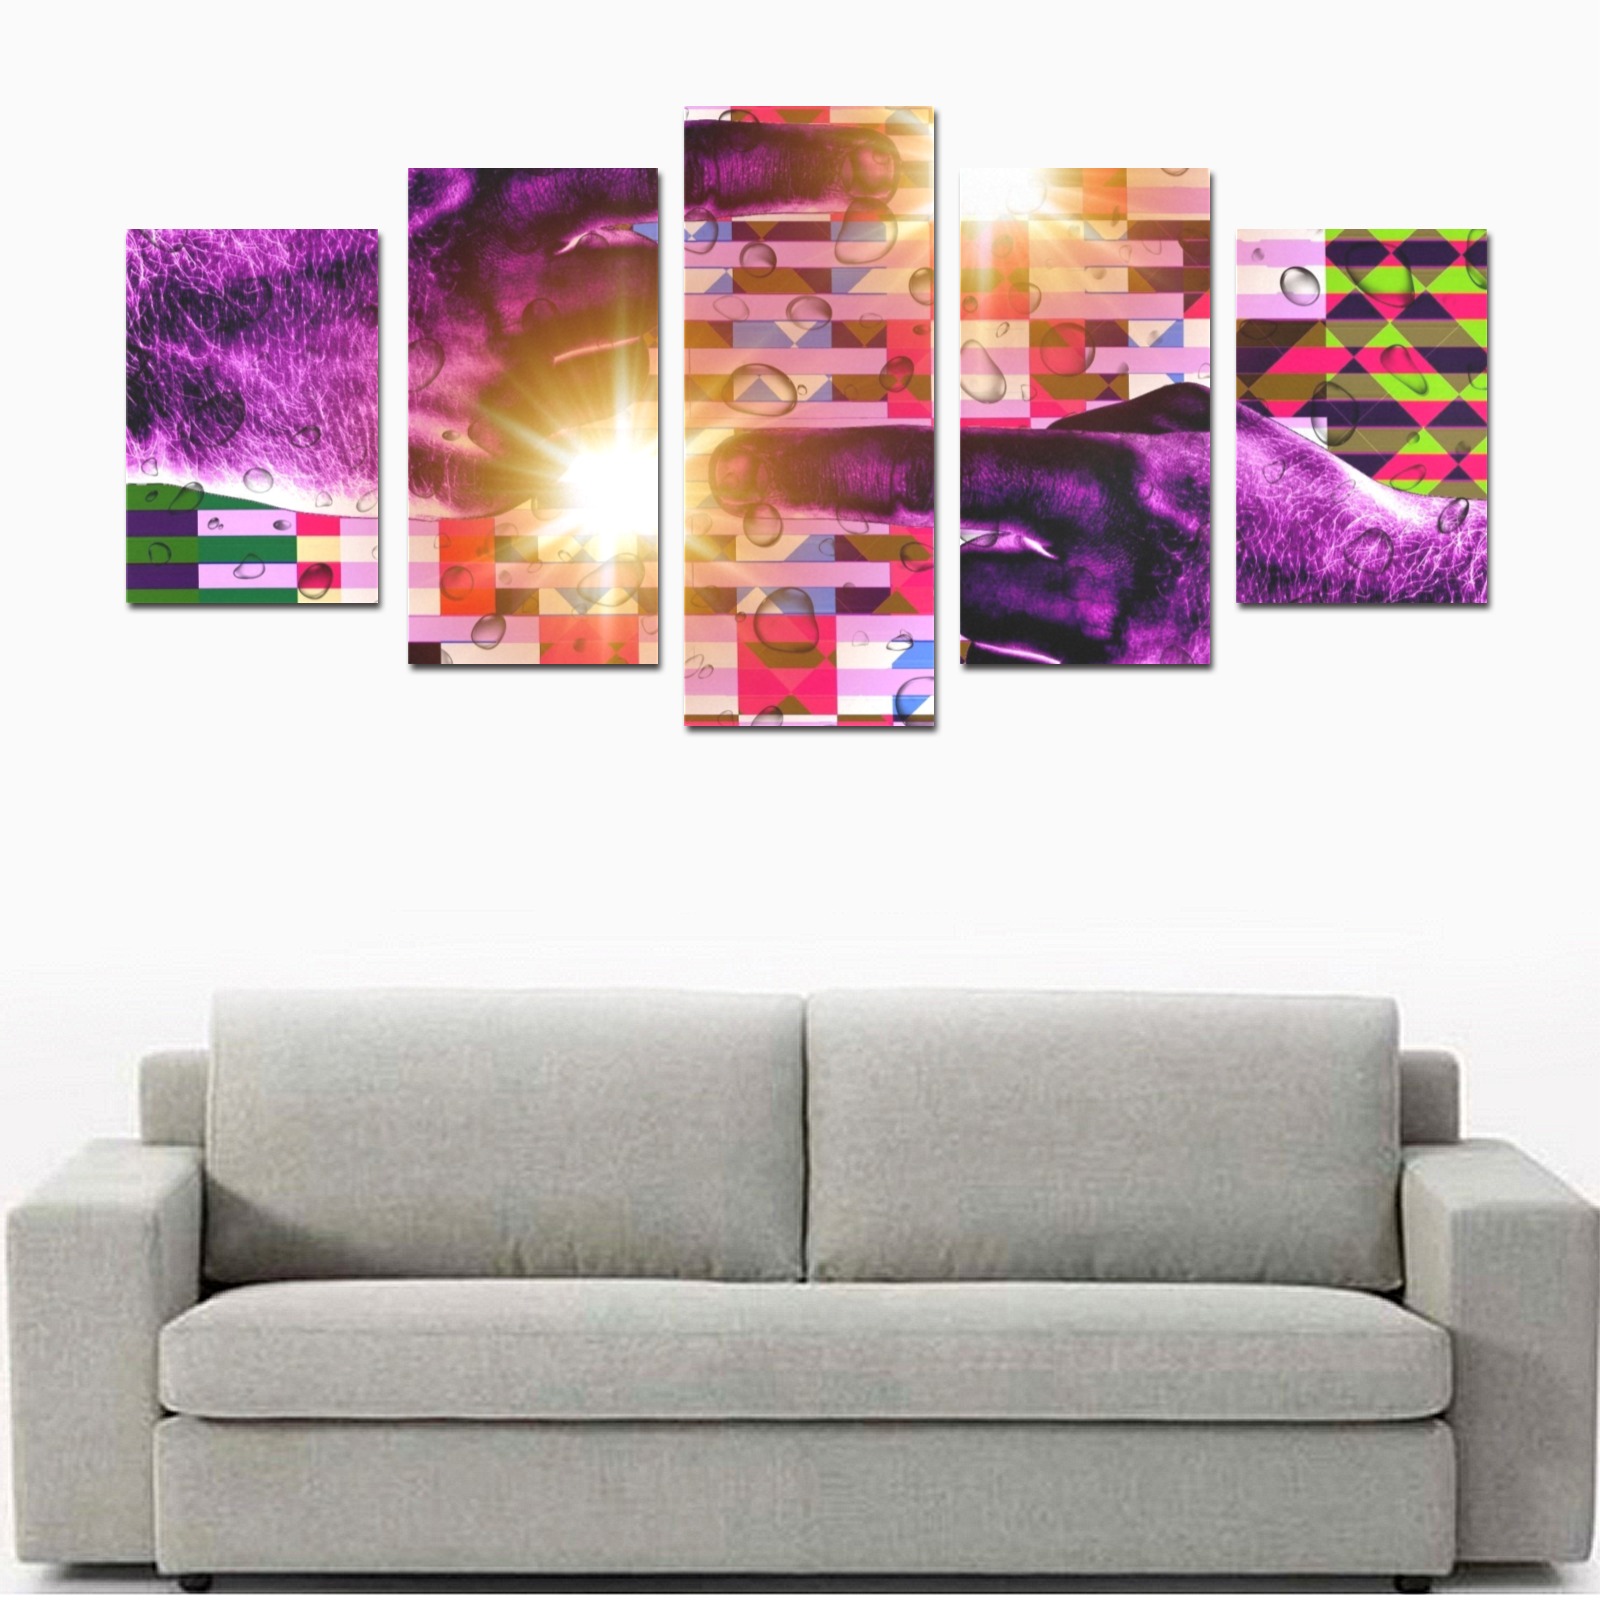 SIMPLY HERE 2 Canvas Print Sets D (No Frame)